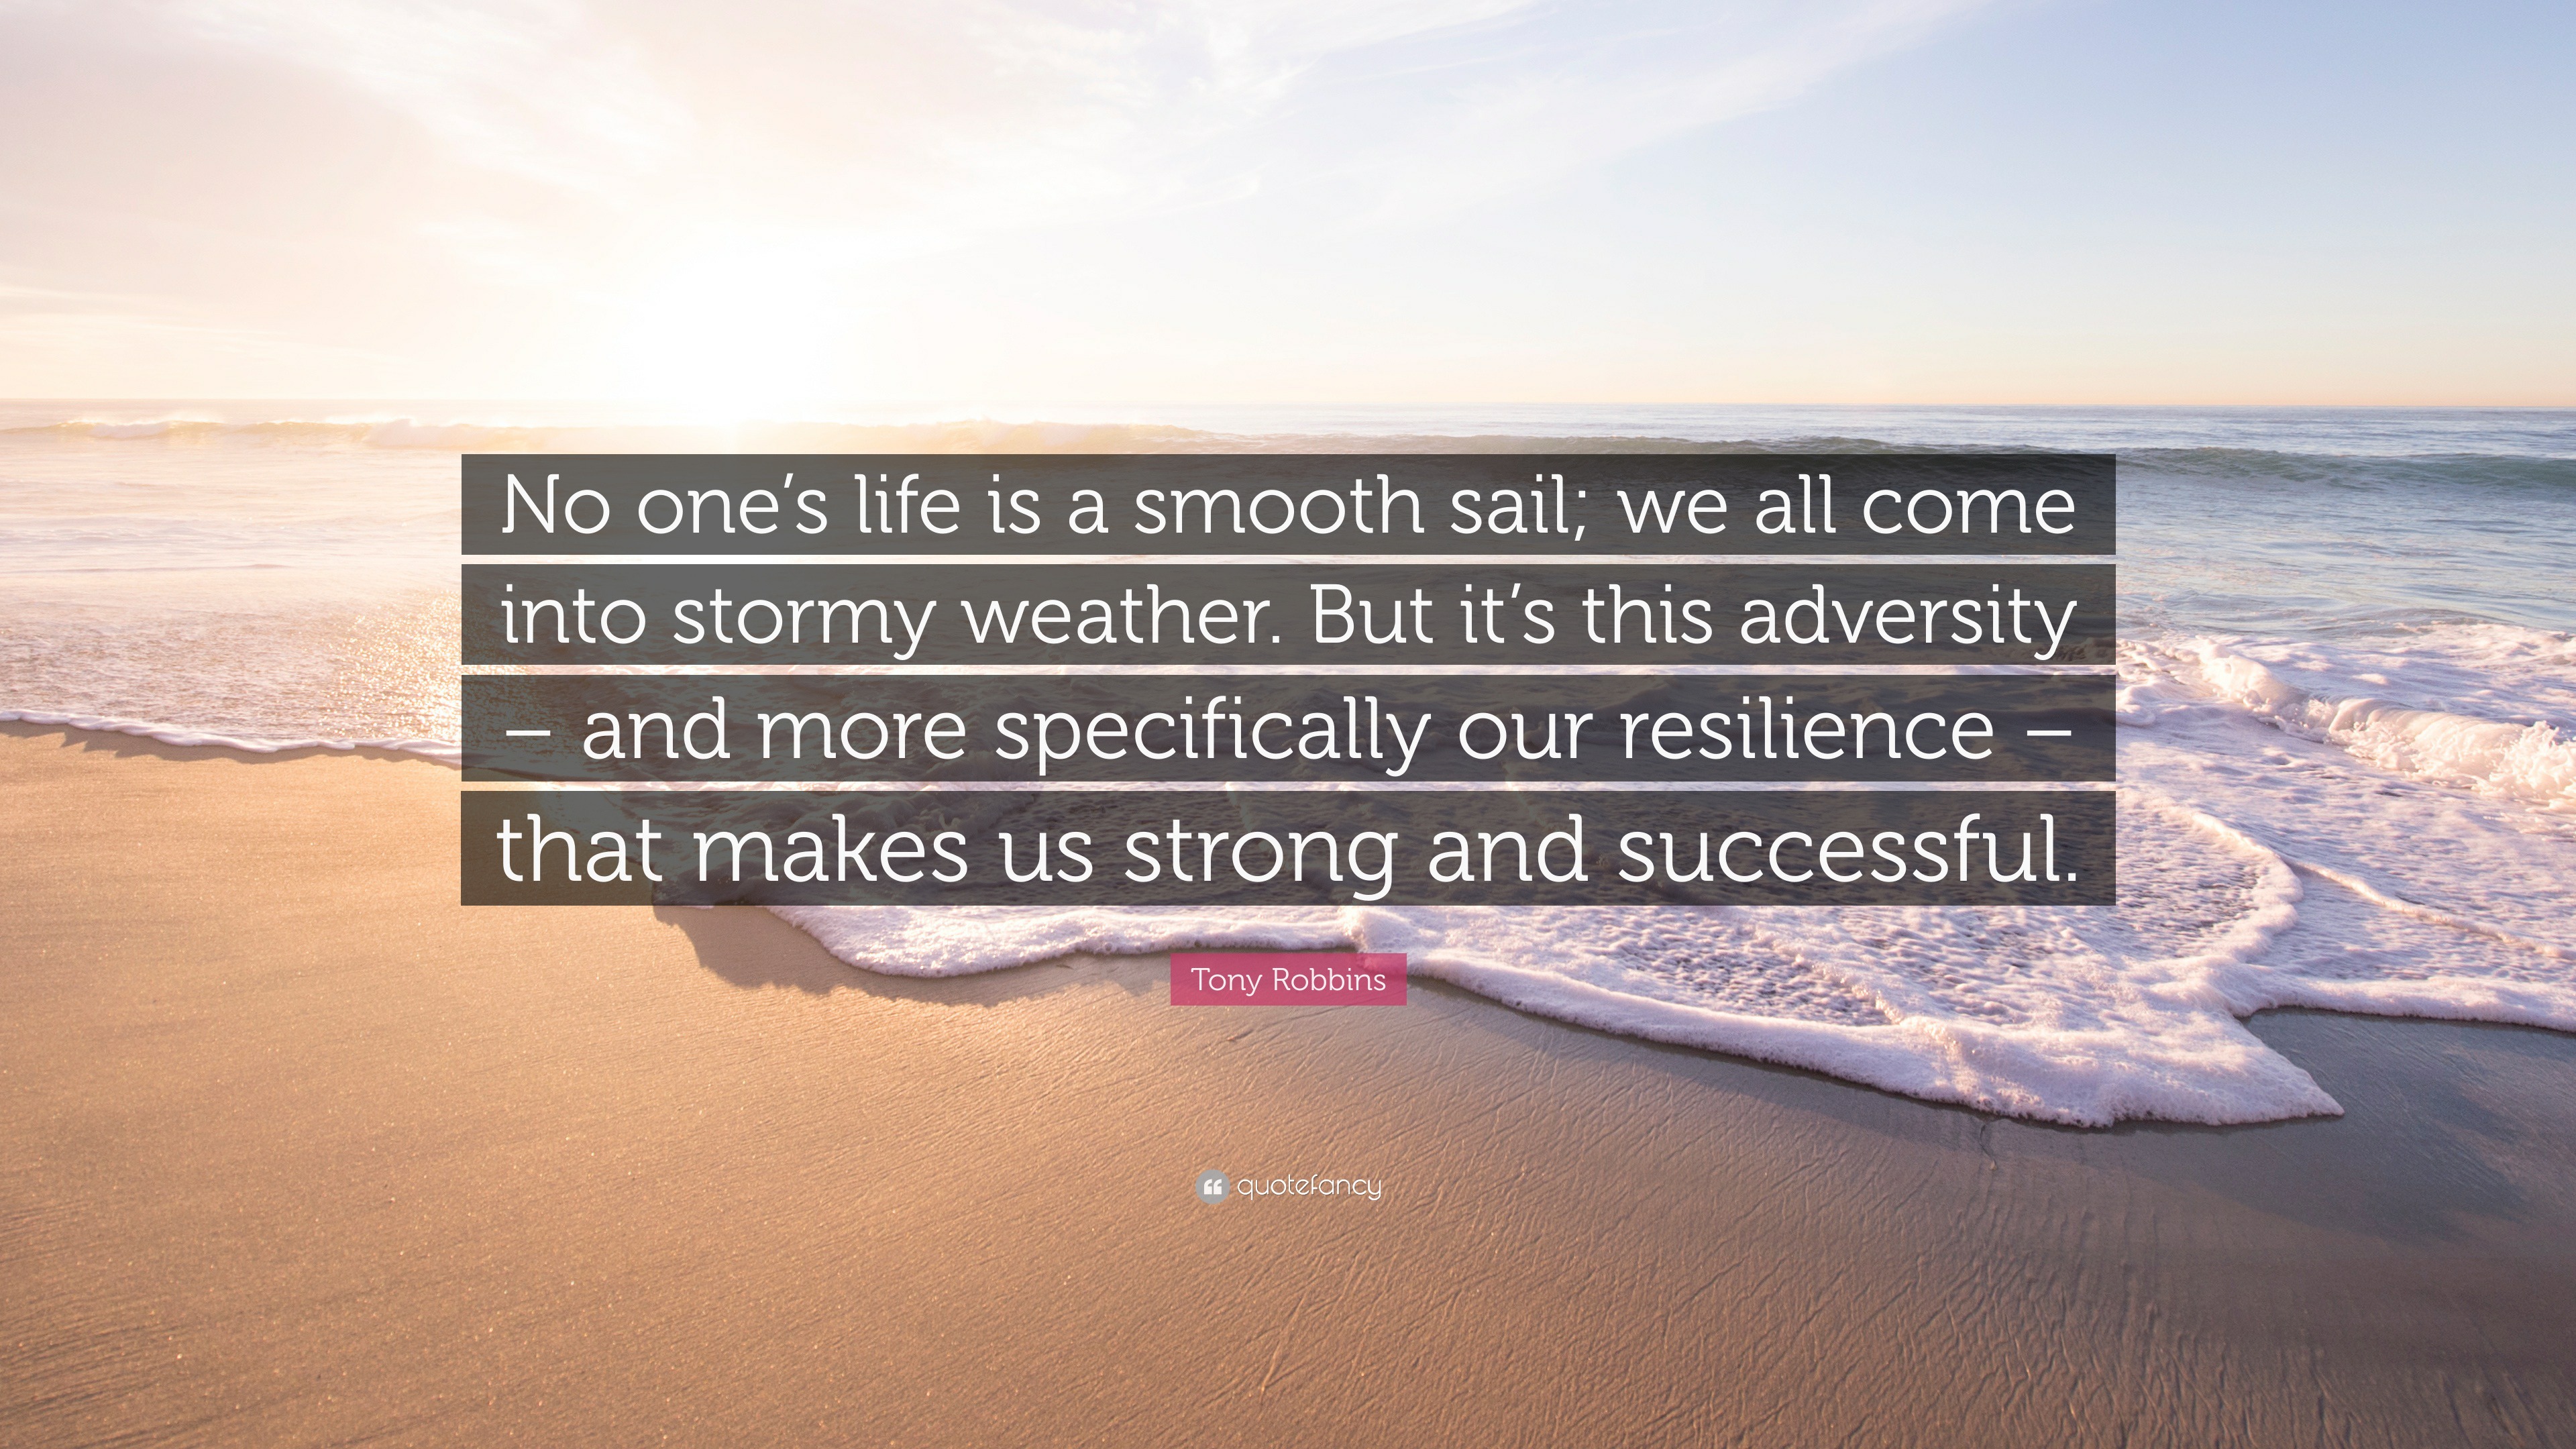 https://quotefancy.com/media/wallpaper/3840x2160/2064970-Tony-Robbins-Quote-No-one-s-life-is-a-smooth-sail-we-all-come-into.jpg